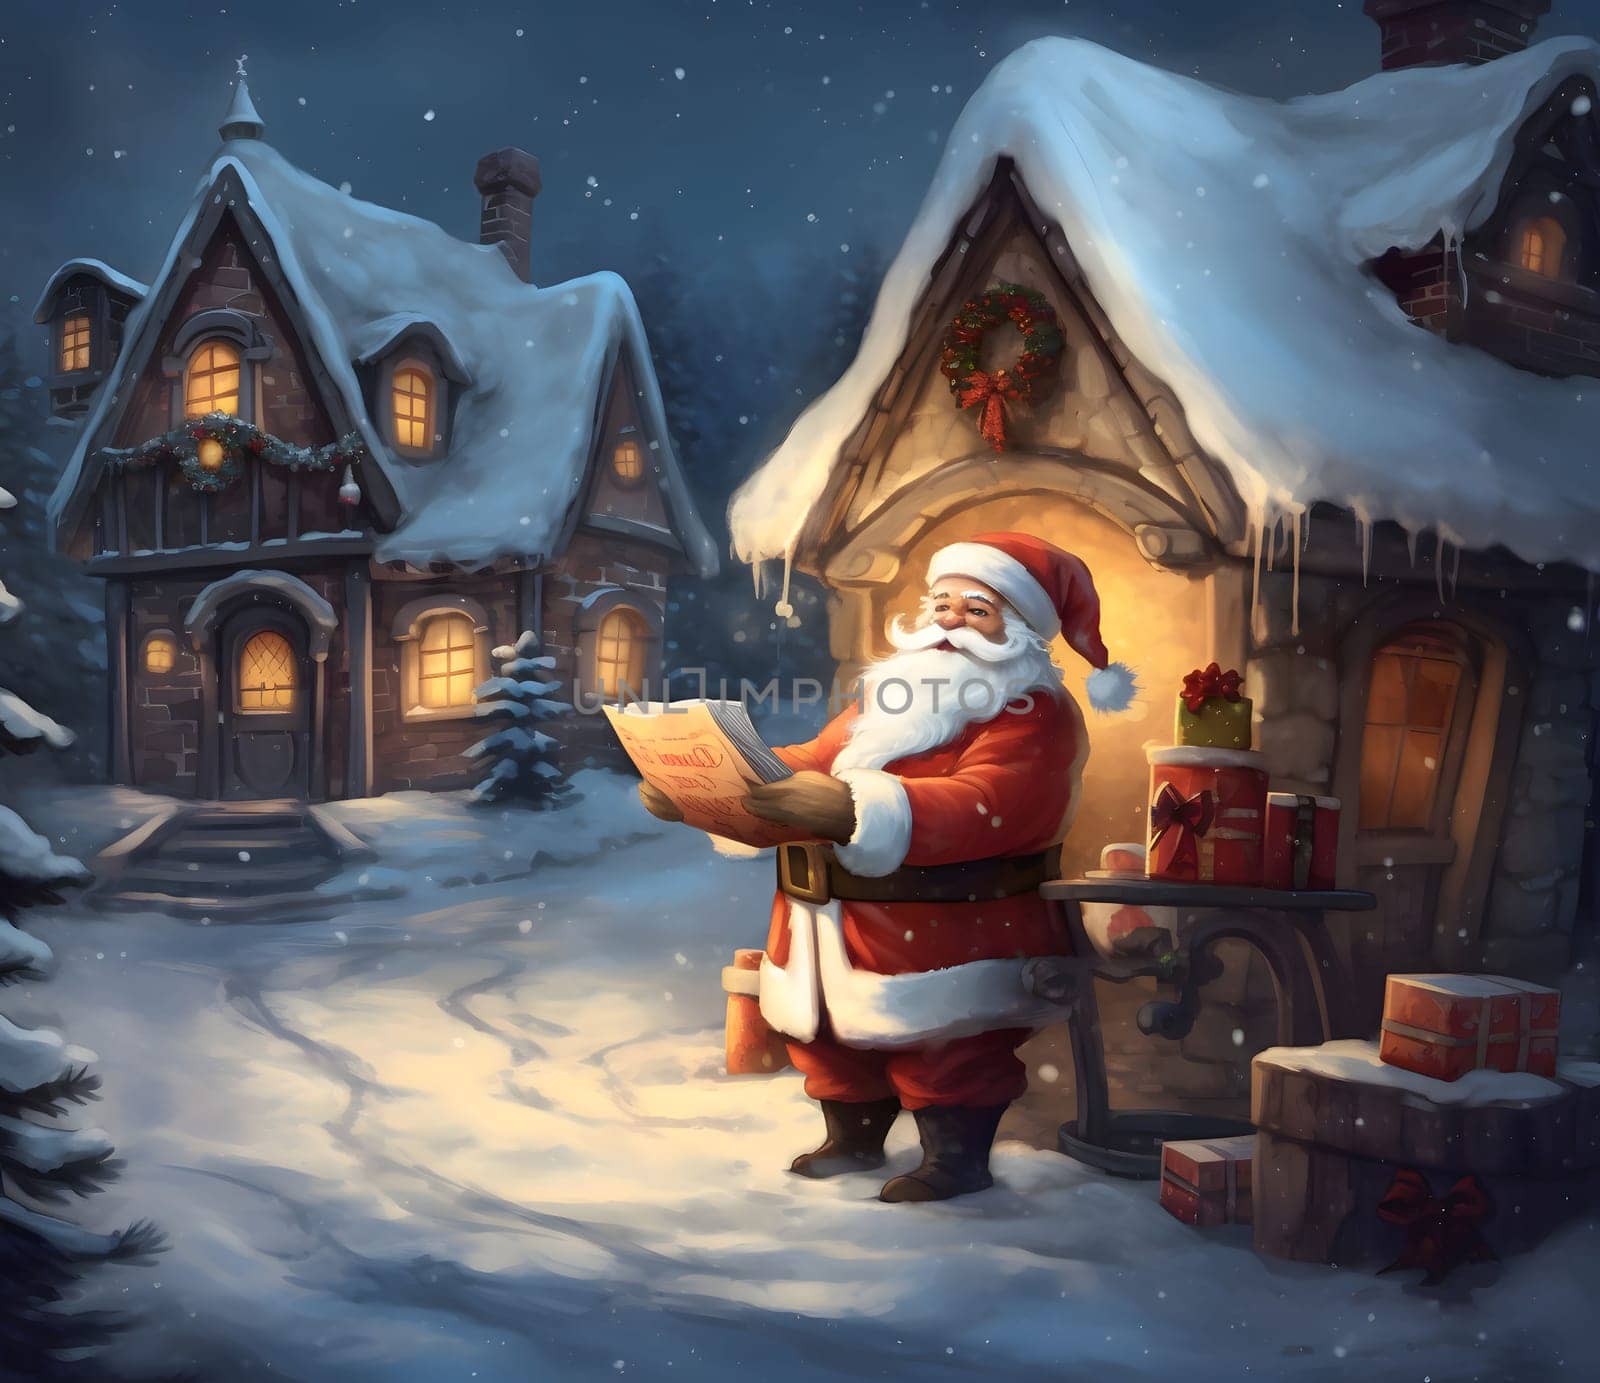 Illustration of Santa Claus reading a letter in front of his hut, winter night scenery. Christmas card as a symbol of remembrance of the birth of the Savior. A time of joy and celebration.